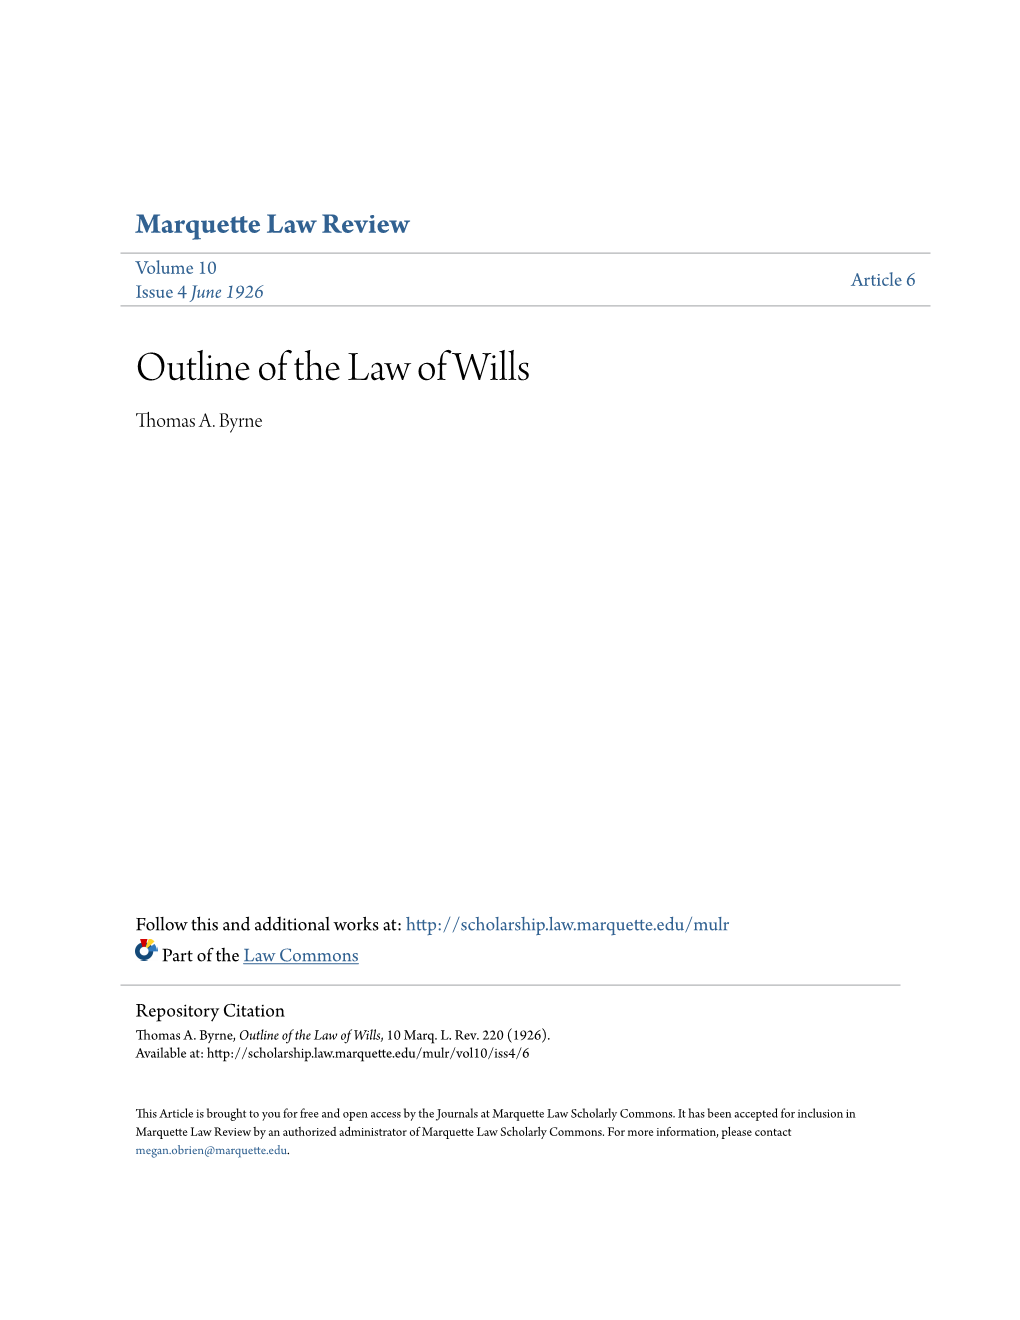 Outline of the Law of Wills Thomas A